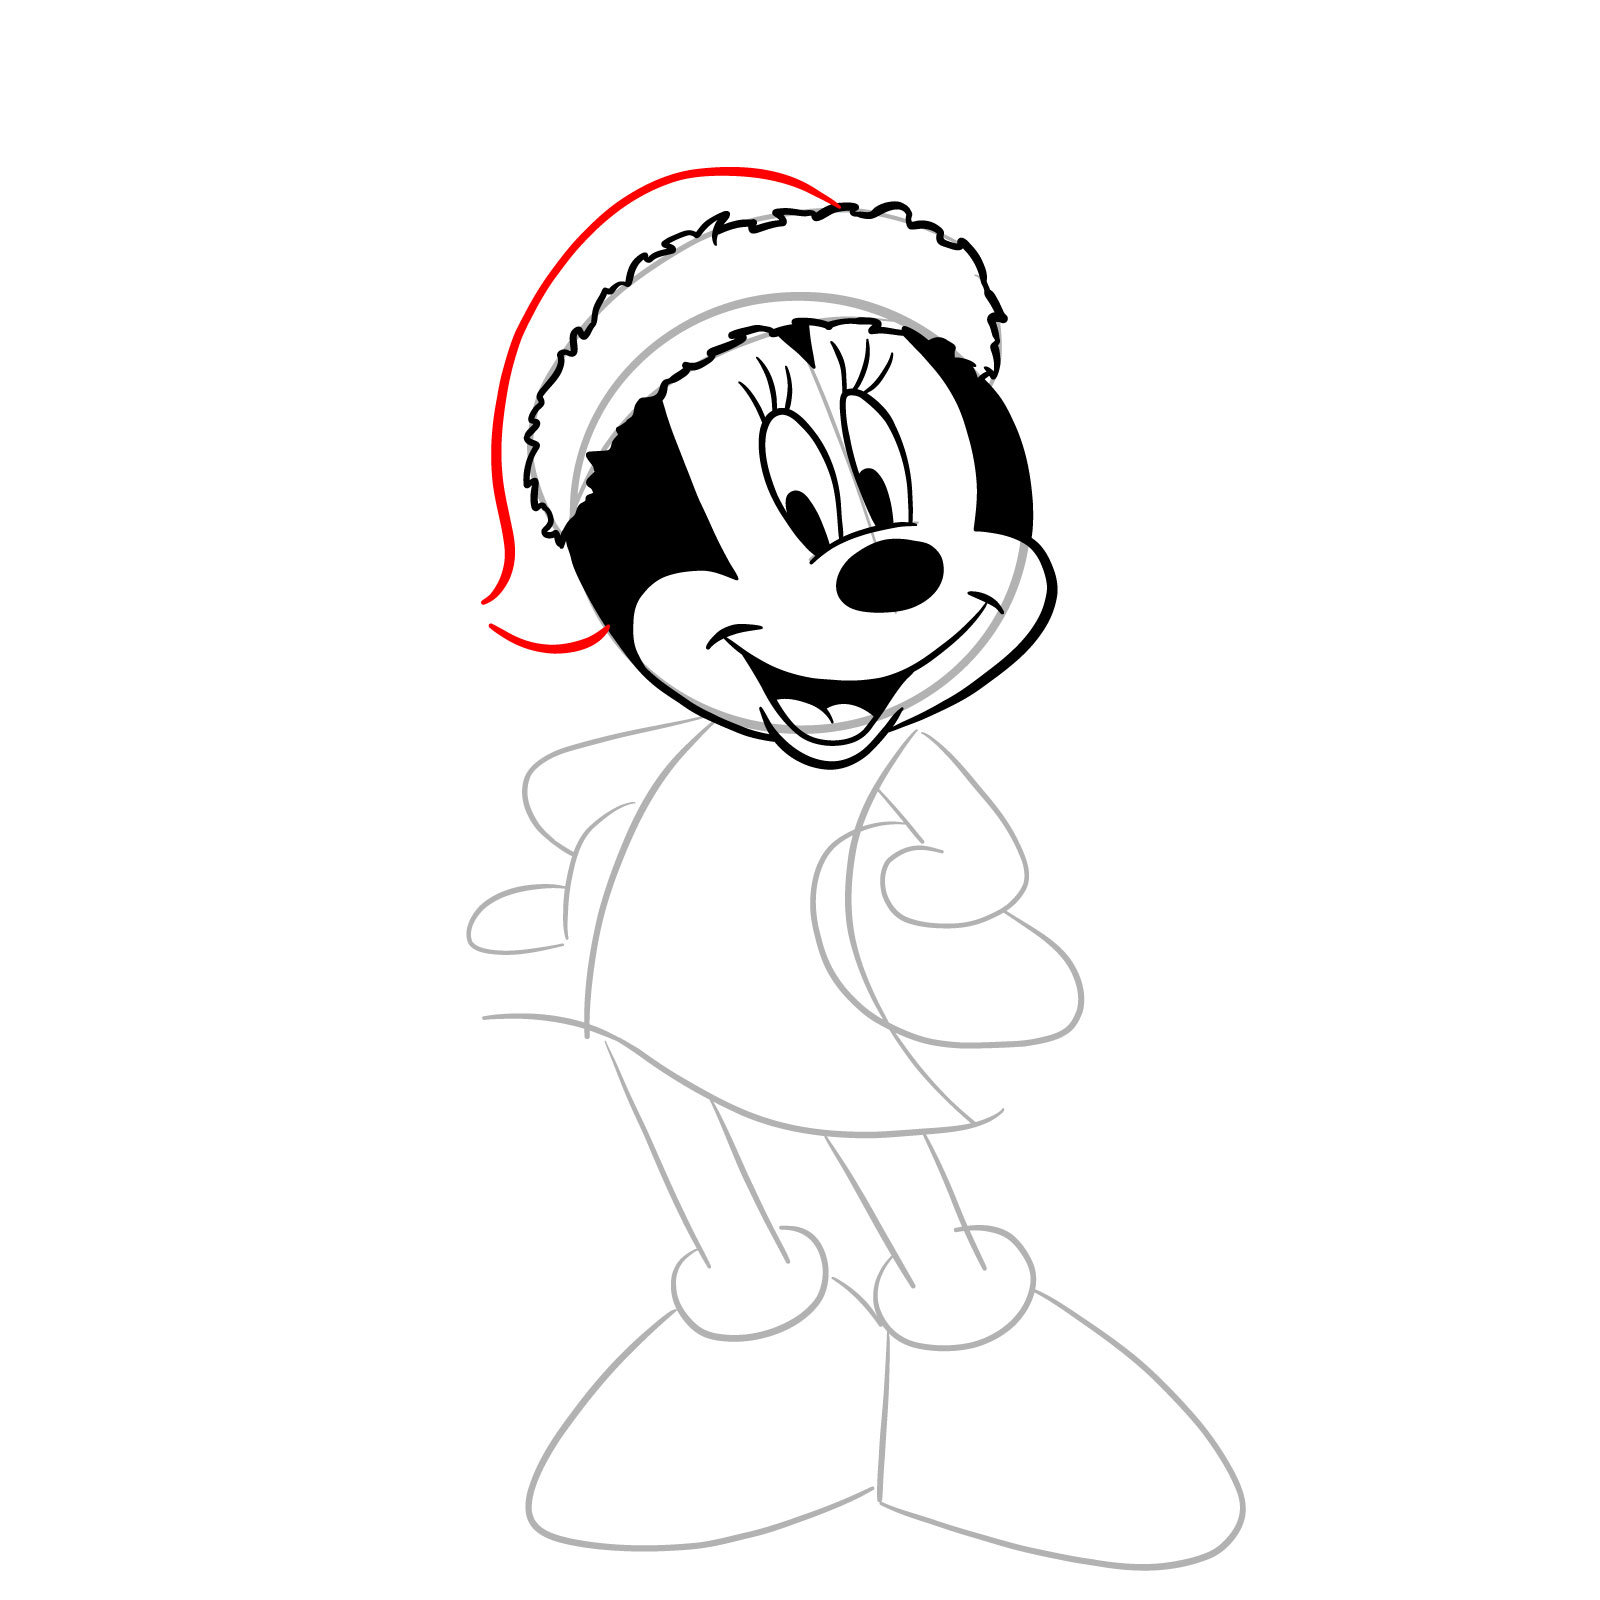 How to draw Minnie in a Christmas dress - step 14